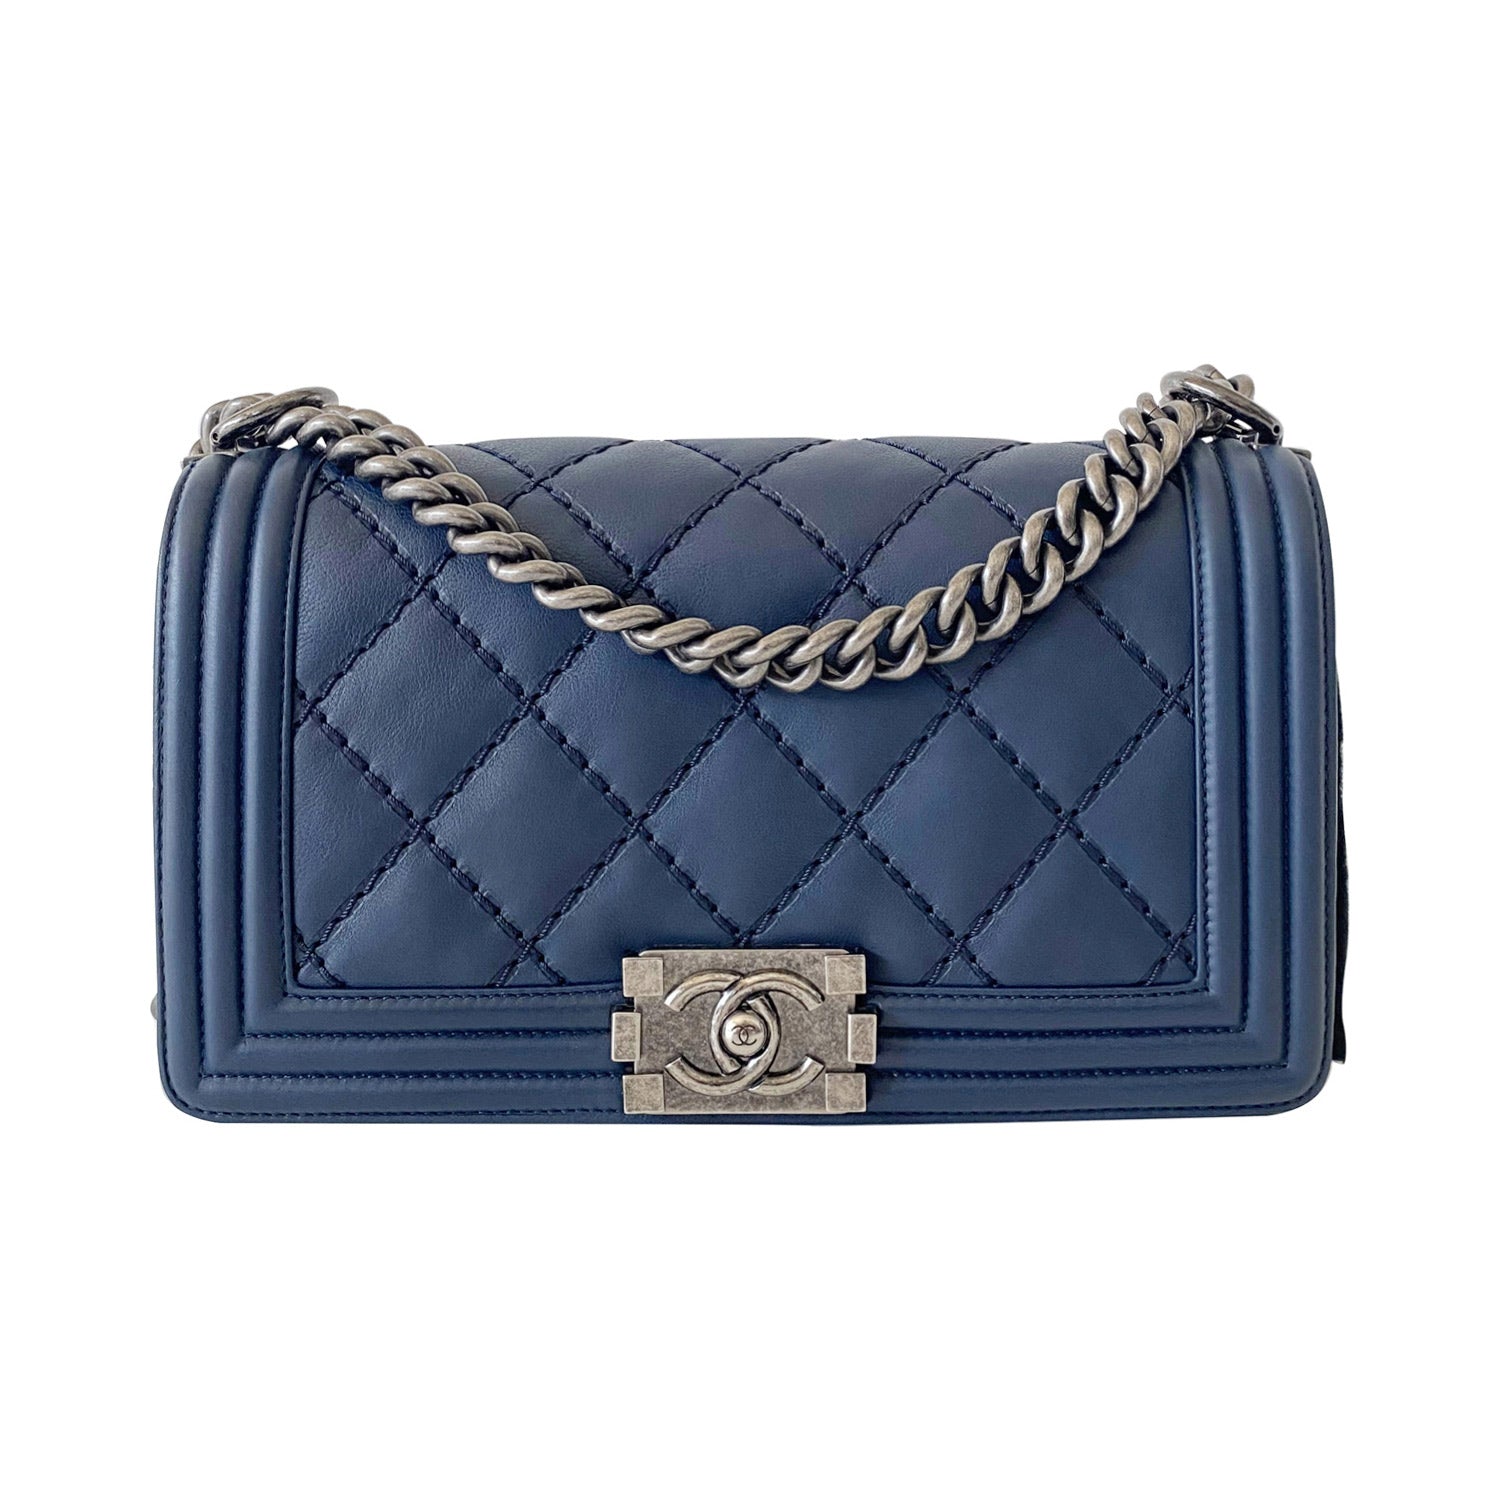 Shop authentic Chanel Medium Quilted Leather Boy Bag at revogue